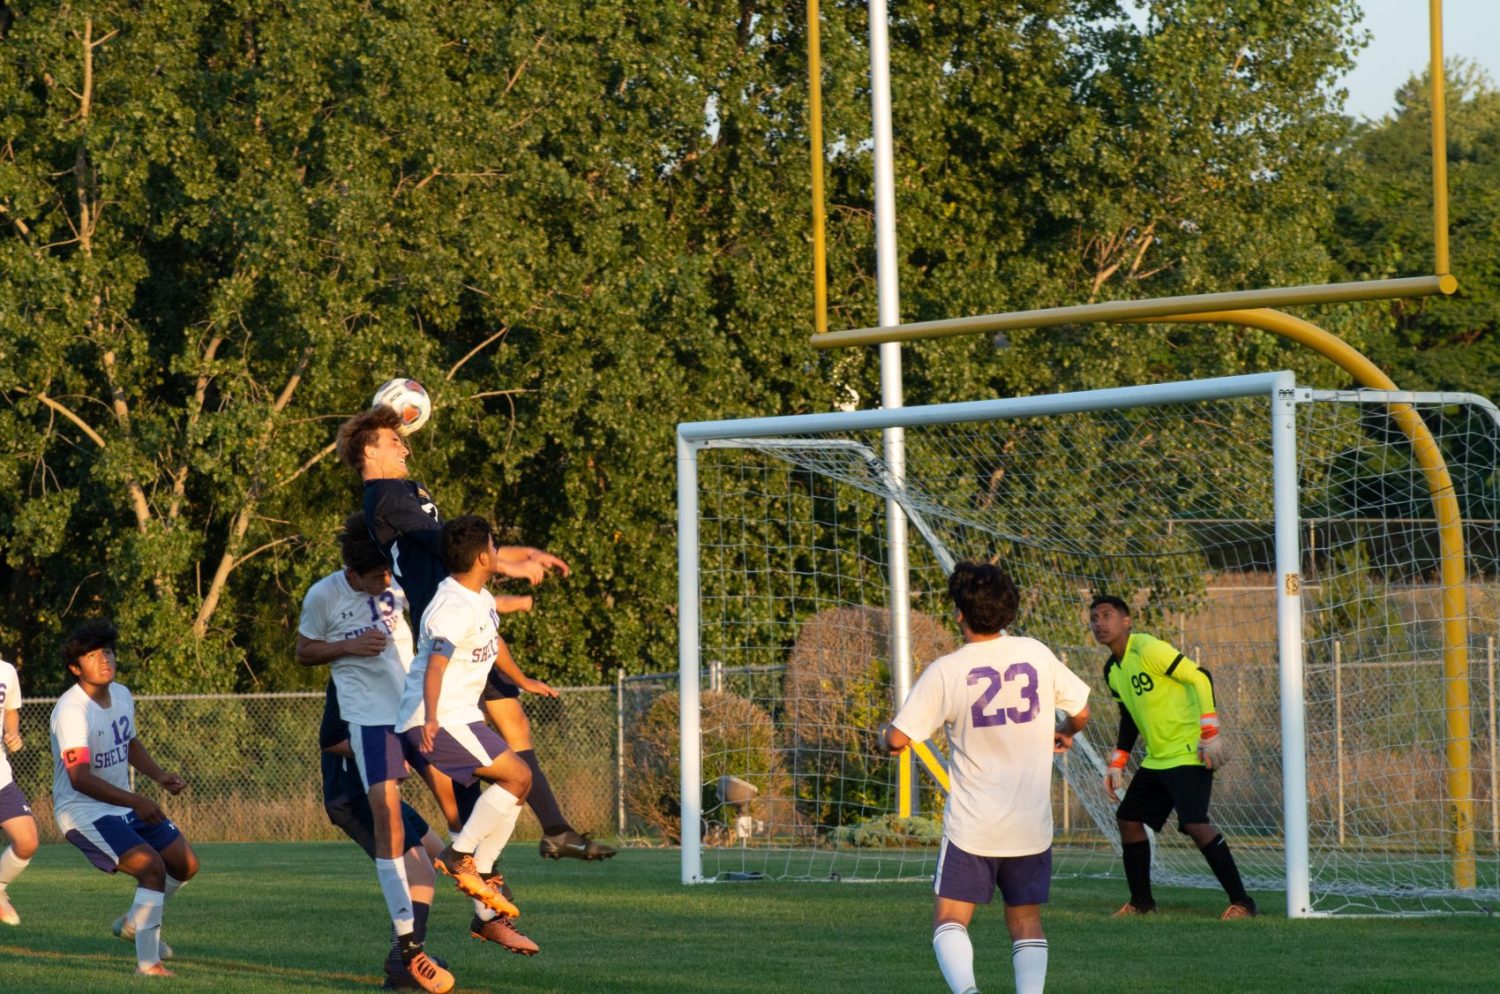 Manistee shuts out Shelby 5-0 in soccer action